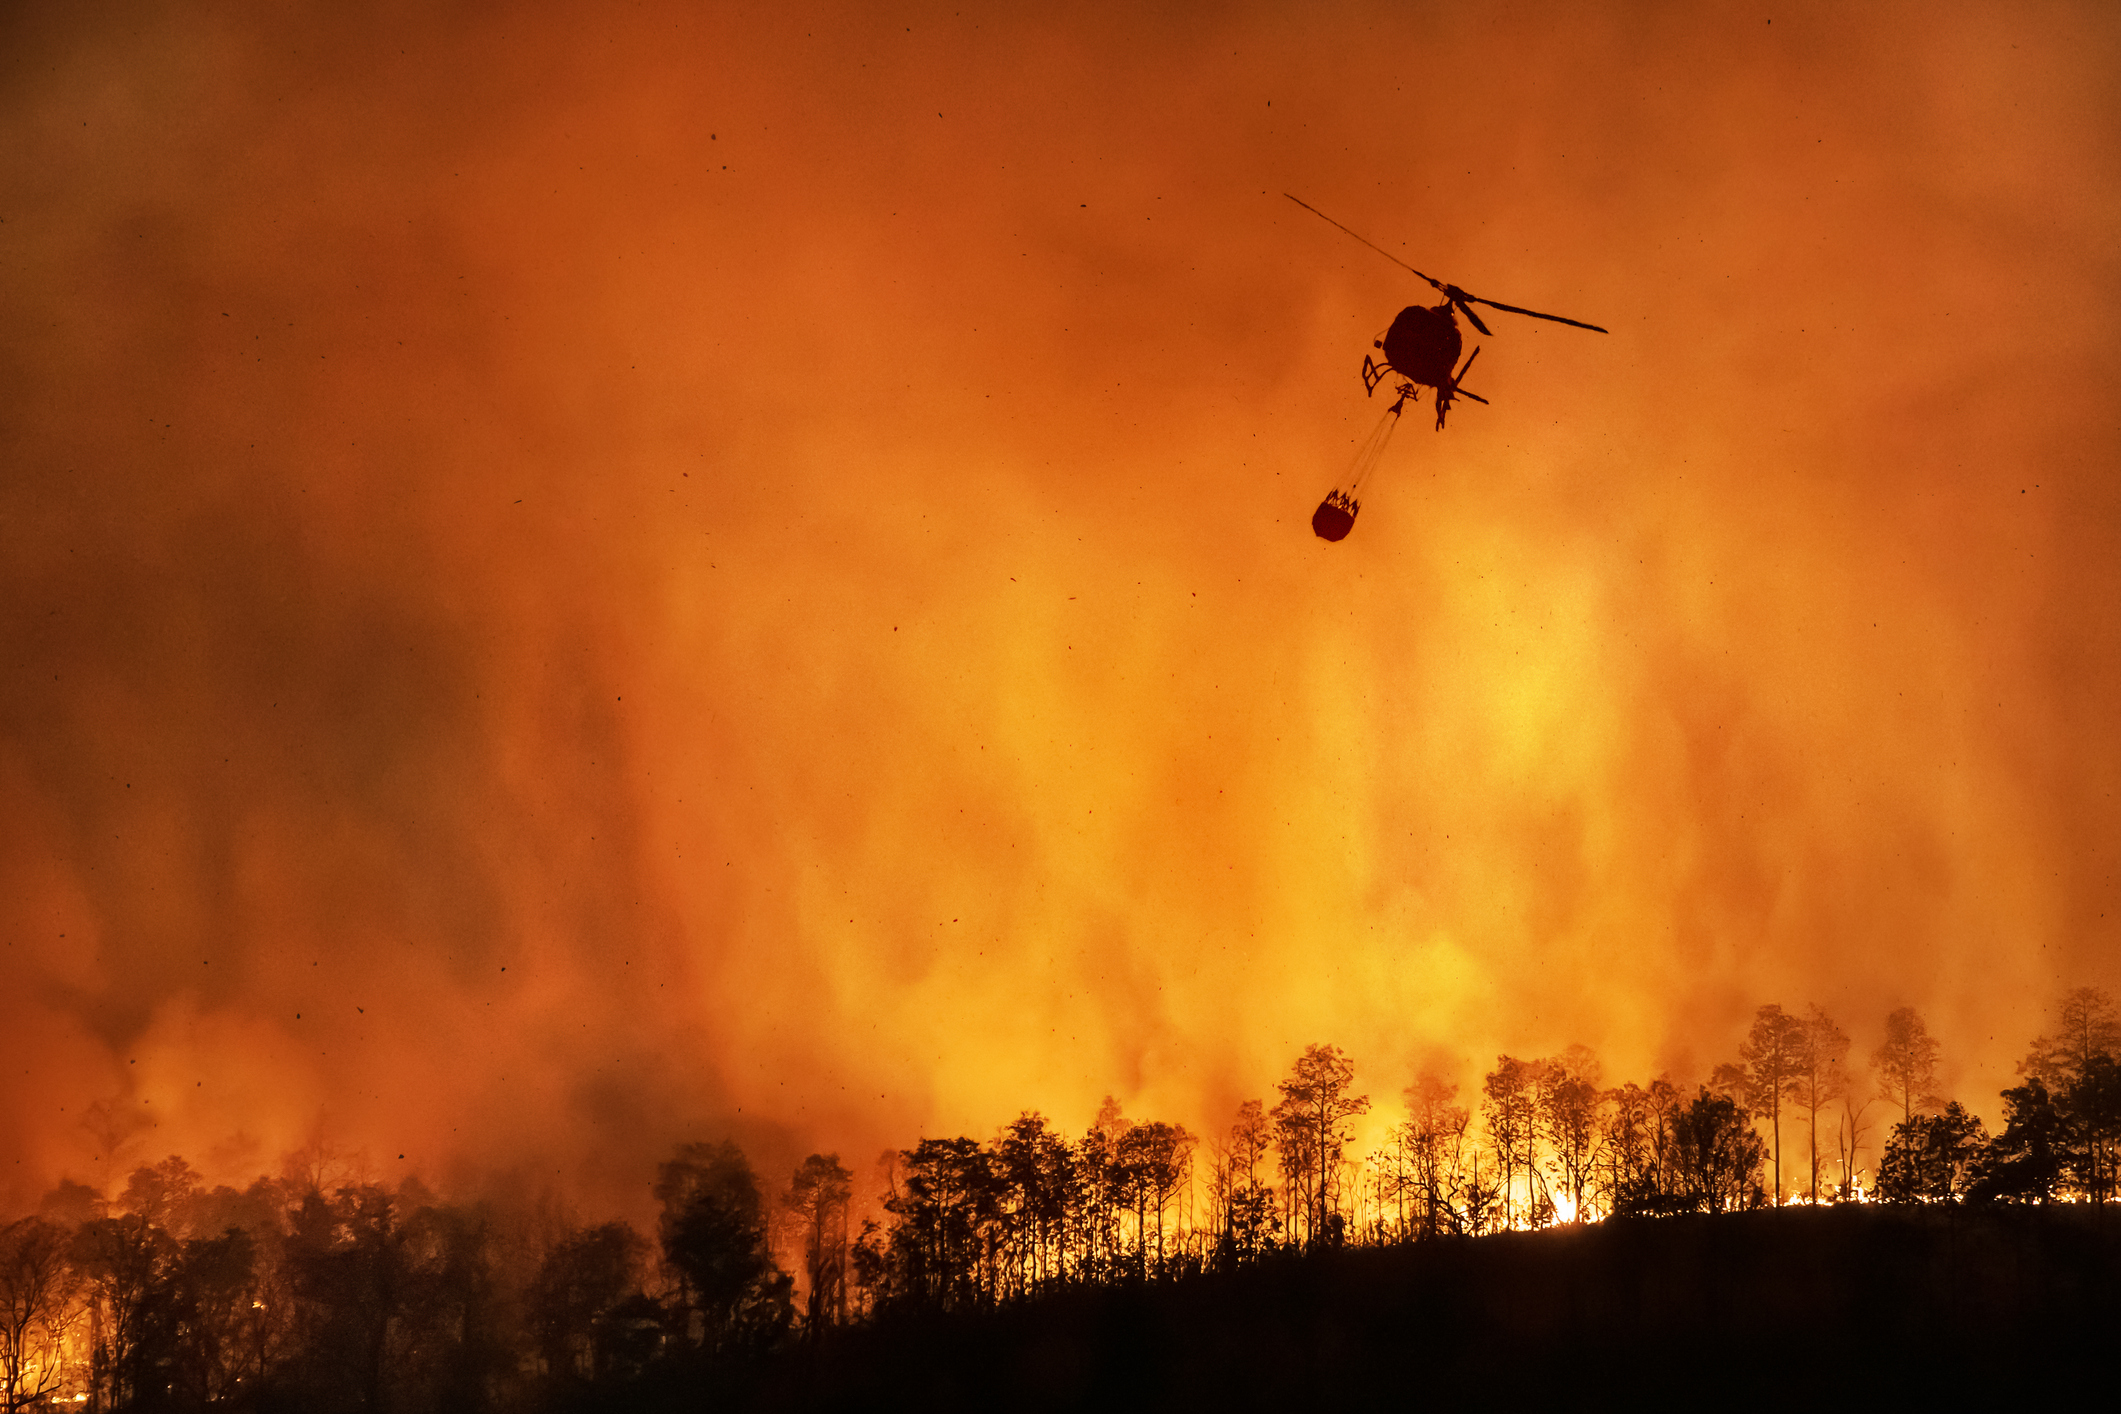 A helicopter dumps water on a raging wildfire in California.